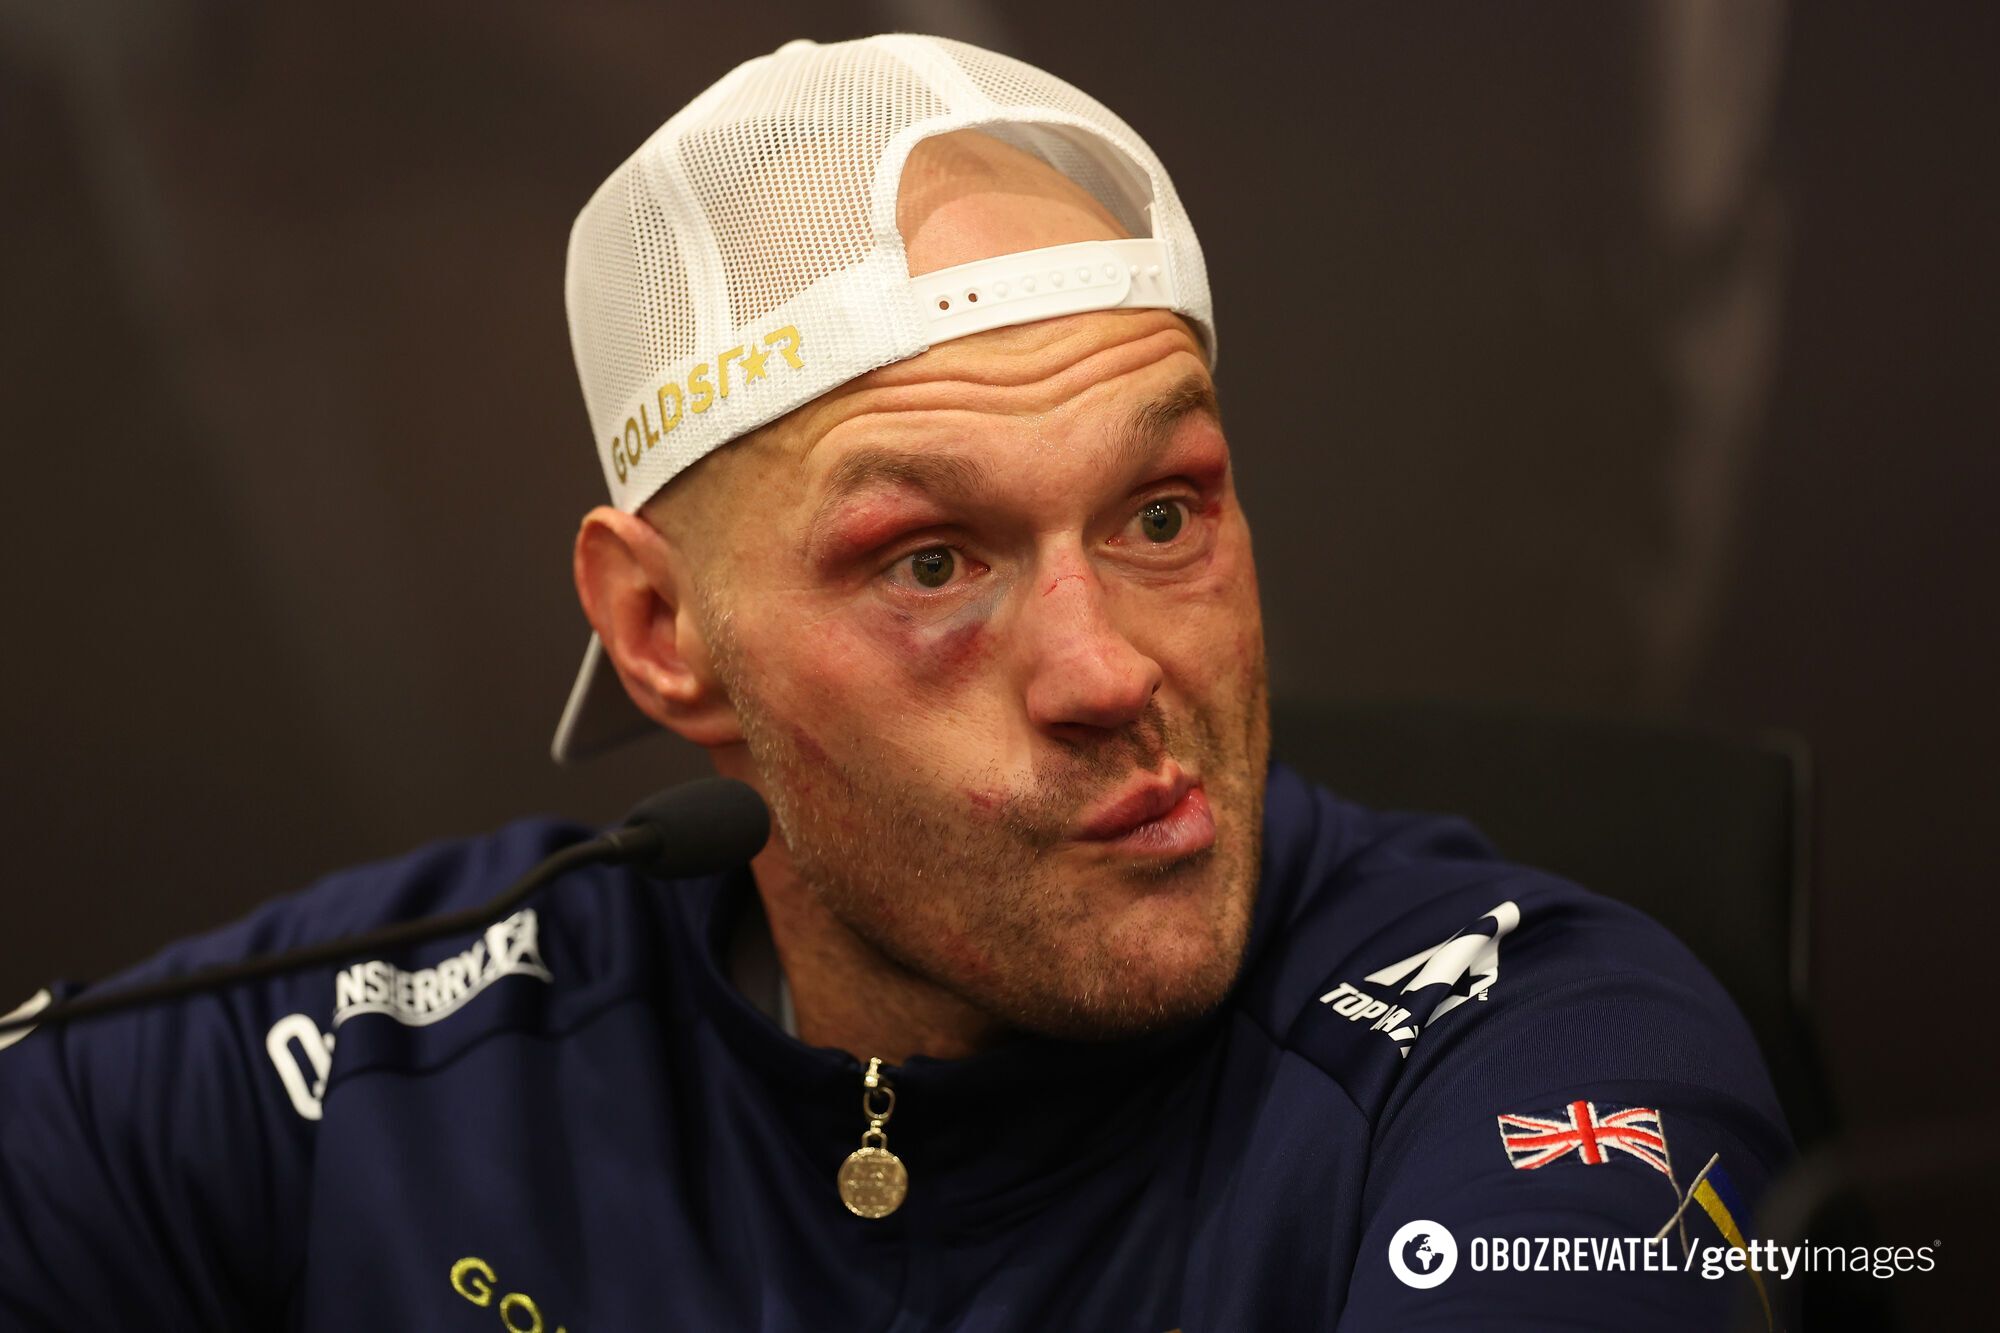 The famous boxer dispelled the main myth about Usyk's weakness